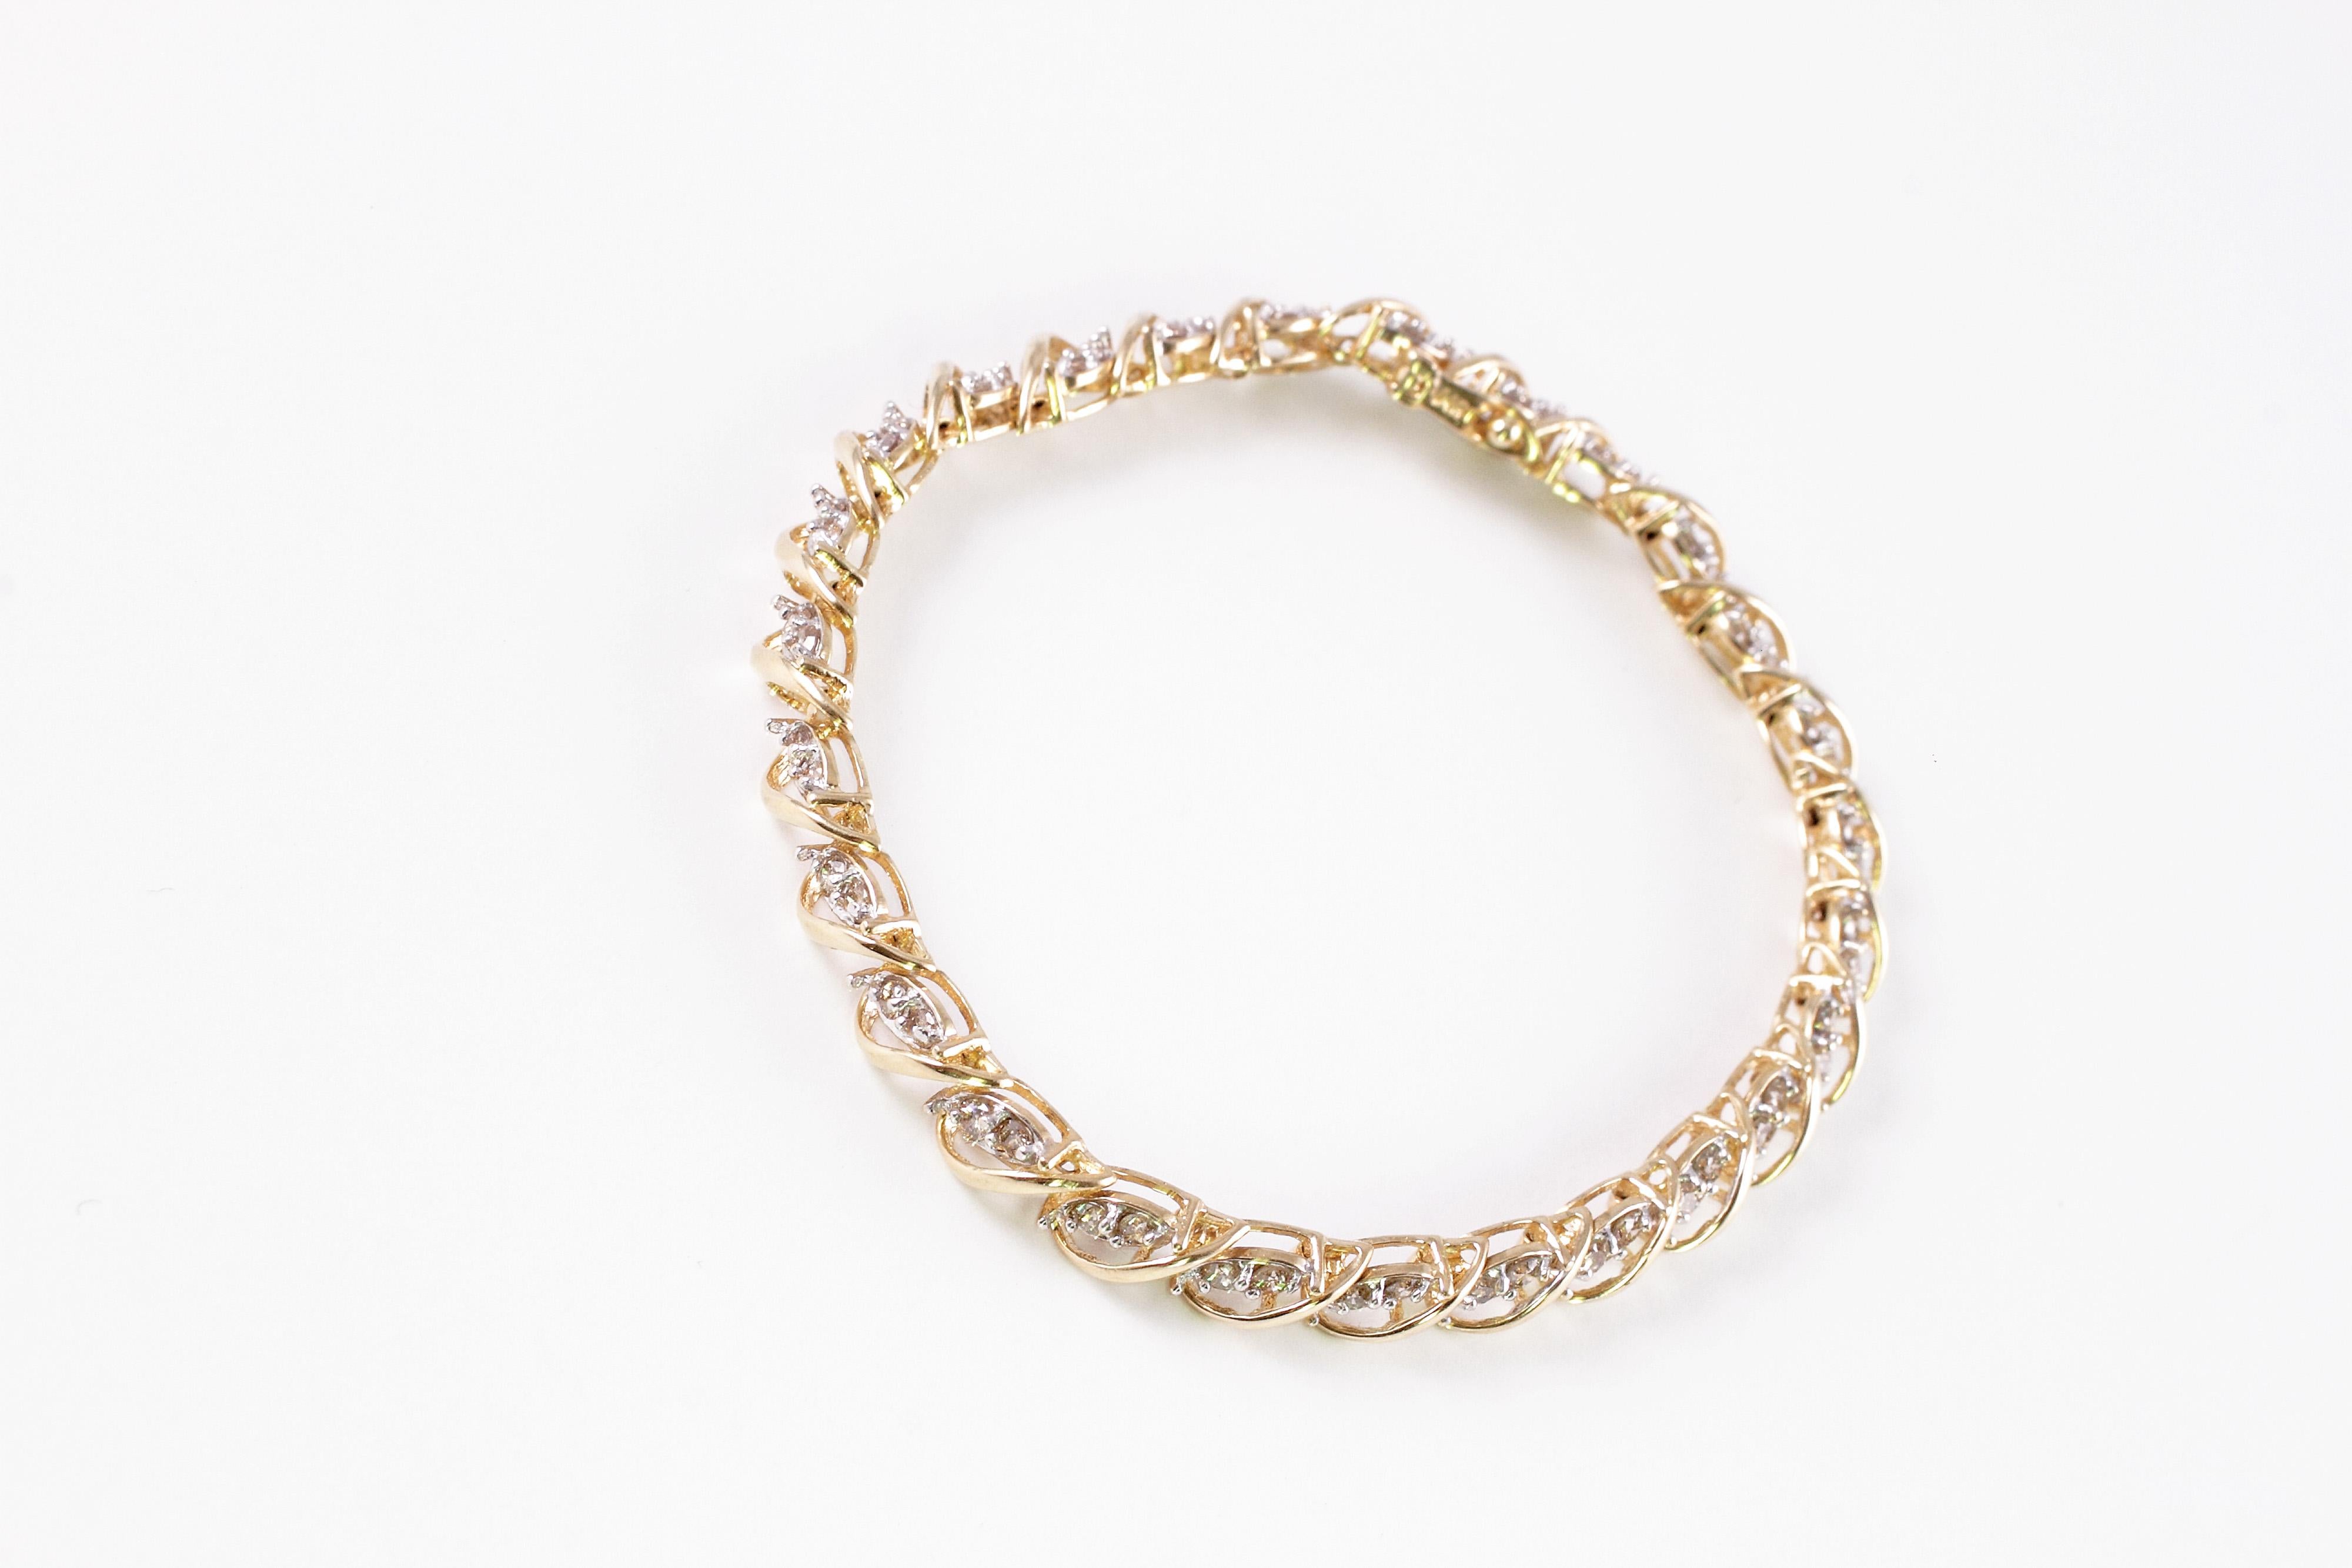 Classic 1.50 carat total weight diamond bracelet in 14 karat yellow gold.  This bracelet is perfect for every day wear or a night on the town!  A diamond bracelet is always in style!